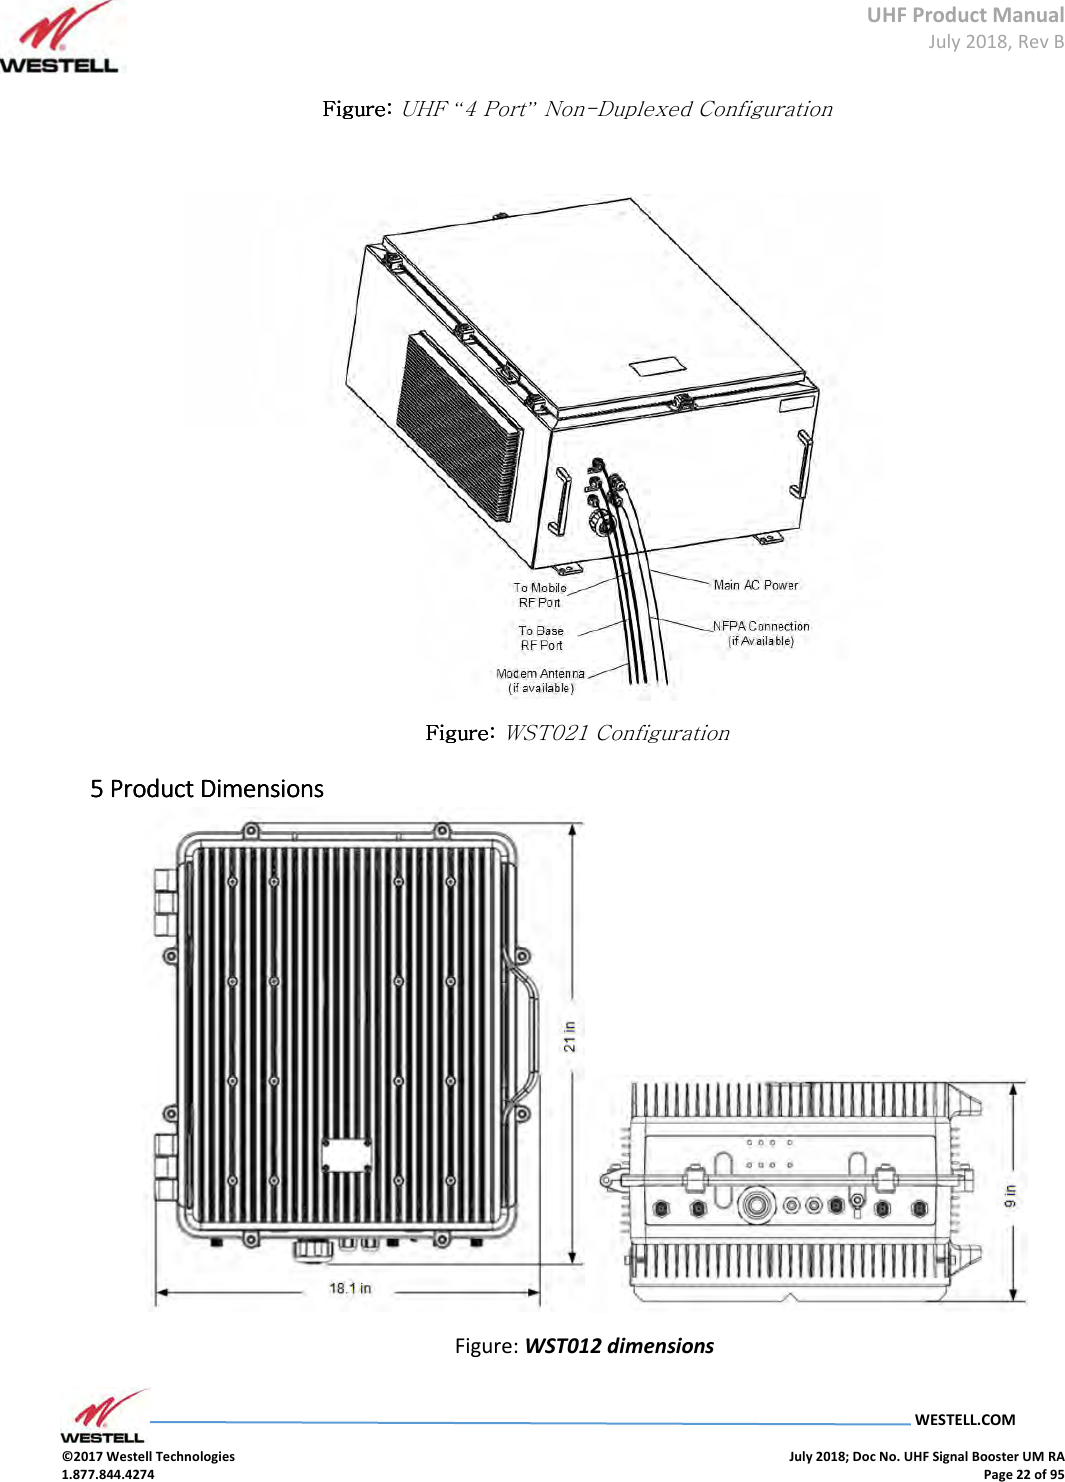 UHF Product Manual July 2018, Rev B   WESTELL.COM  ©2017 Westell Technologies    July 2018; Doc No. UHF Signal Booster UM RA 1.877.844.4274    Page 22 of 95  Figure: Figure: Figure: Figure: UHF “4 Port” Non-Duplexed Configuration      Figure: Figure: Figure: Figure: WST021 Configuration 5 5 5 5 Product DimensionsProduct DimensionsProduct DimensionsProduct Dimensions     Figure: WST012 dimensions 